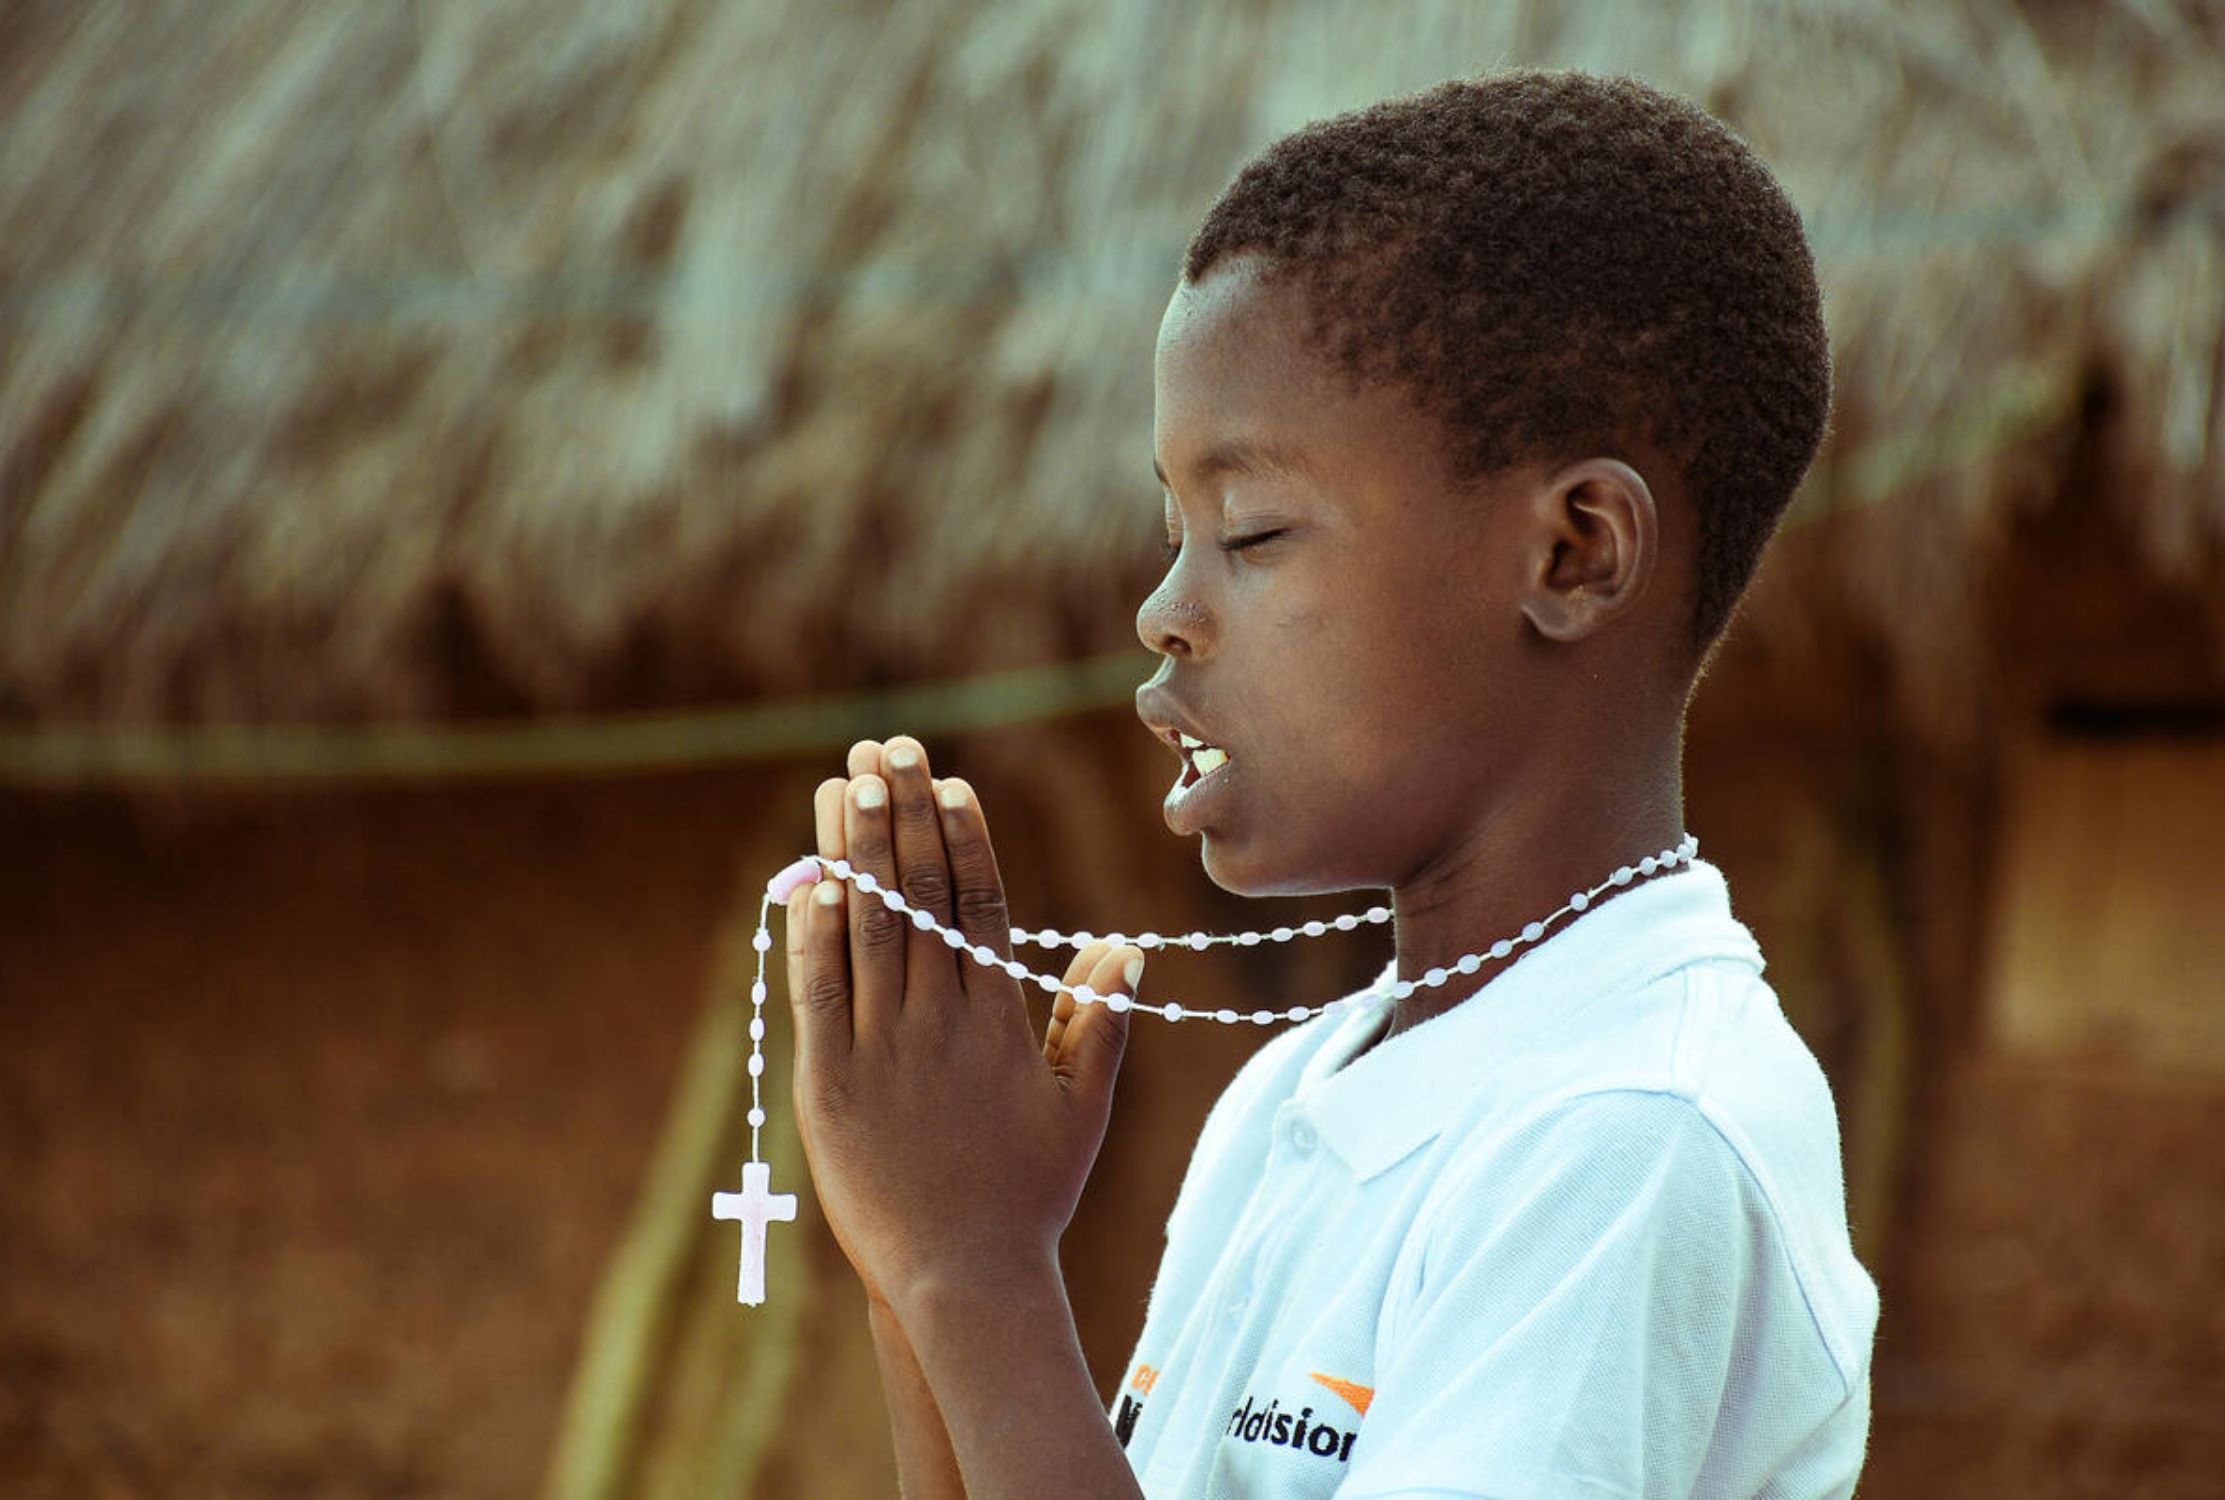 Ghanaian boy with eyes closed and hand pressed together praying, his cross necklace drapes over his fingers